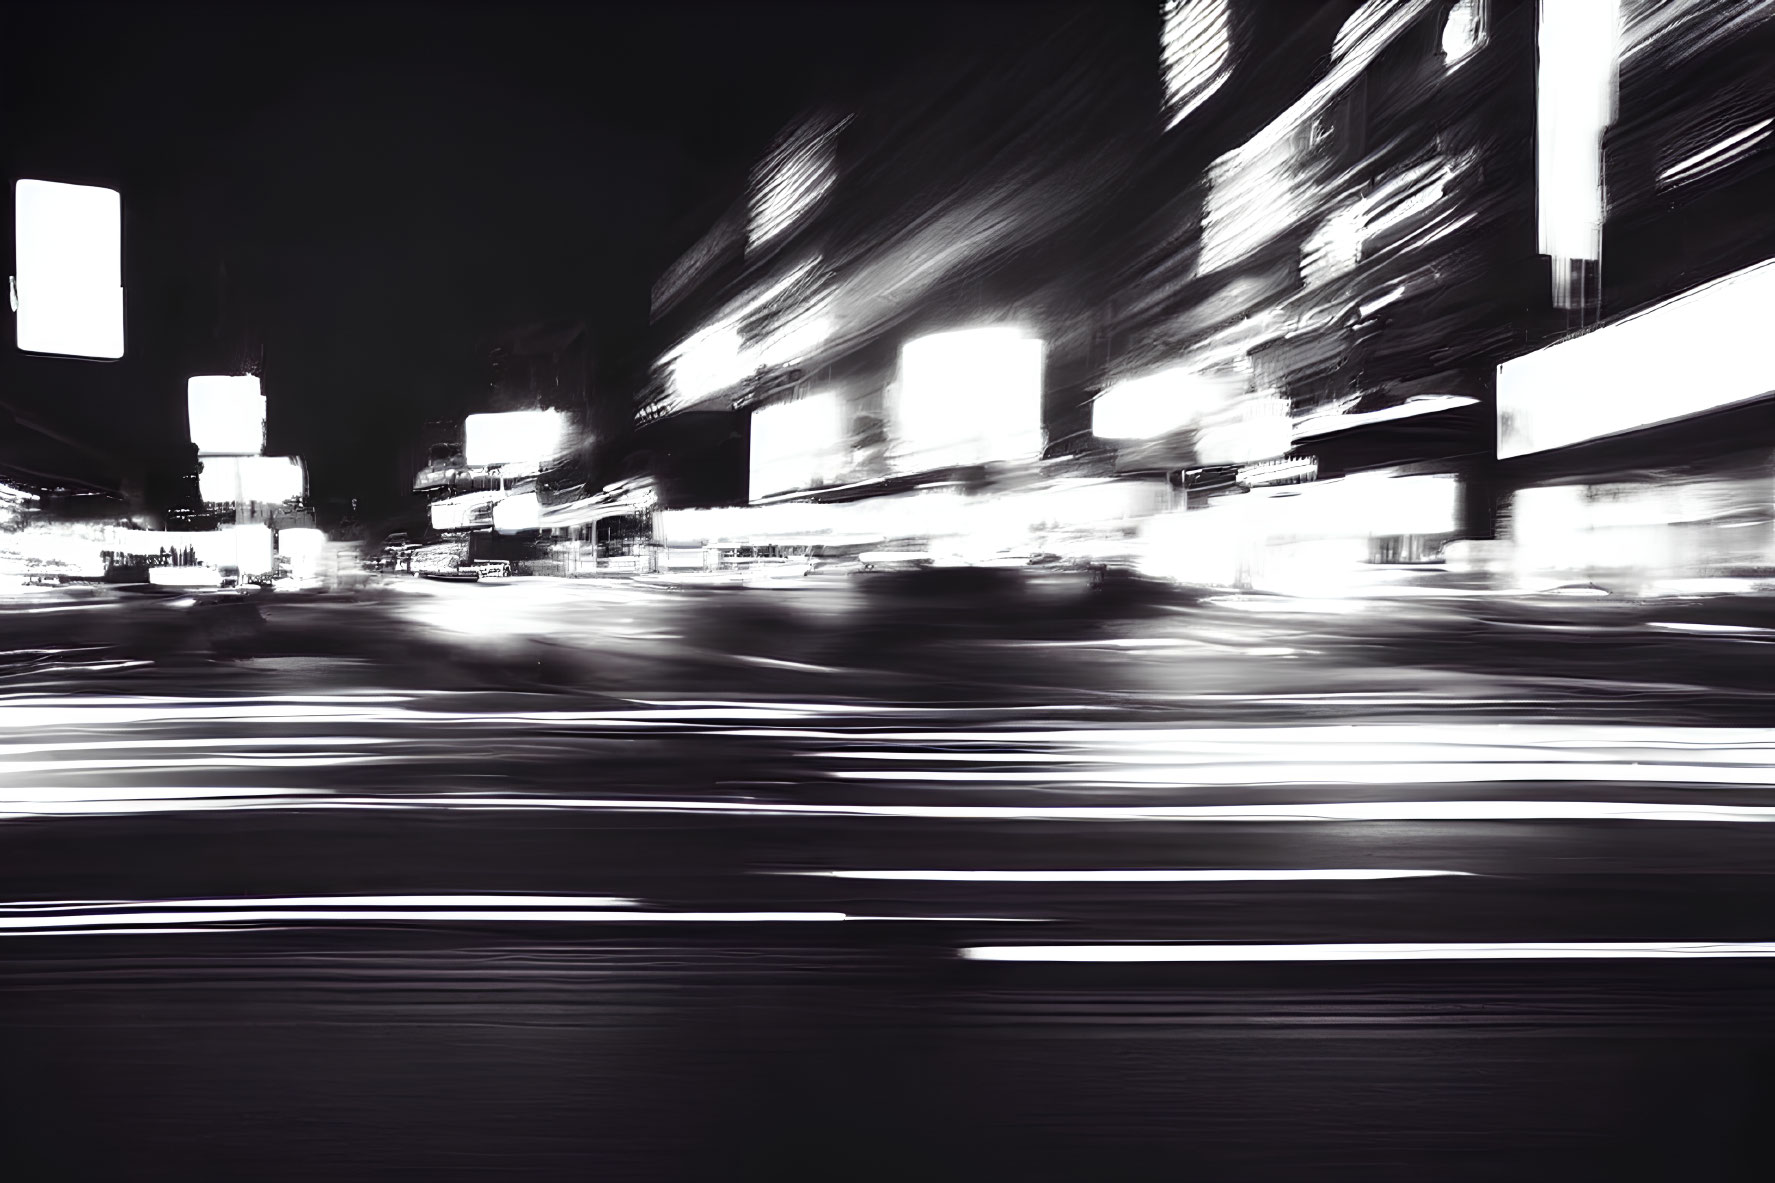 High-contrast black and white city street night scene with motion blur and glowing lights.